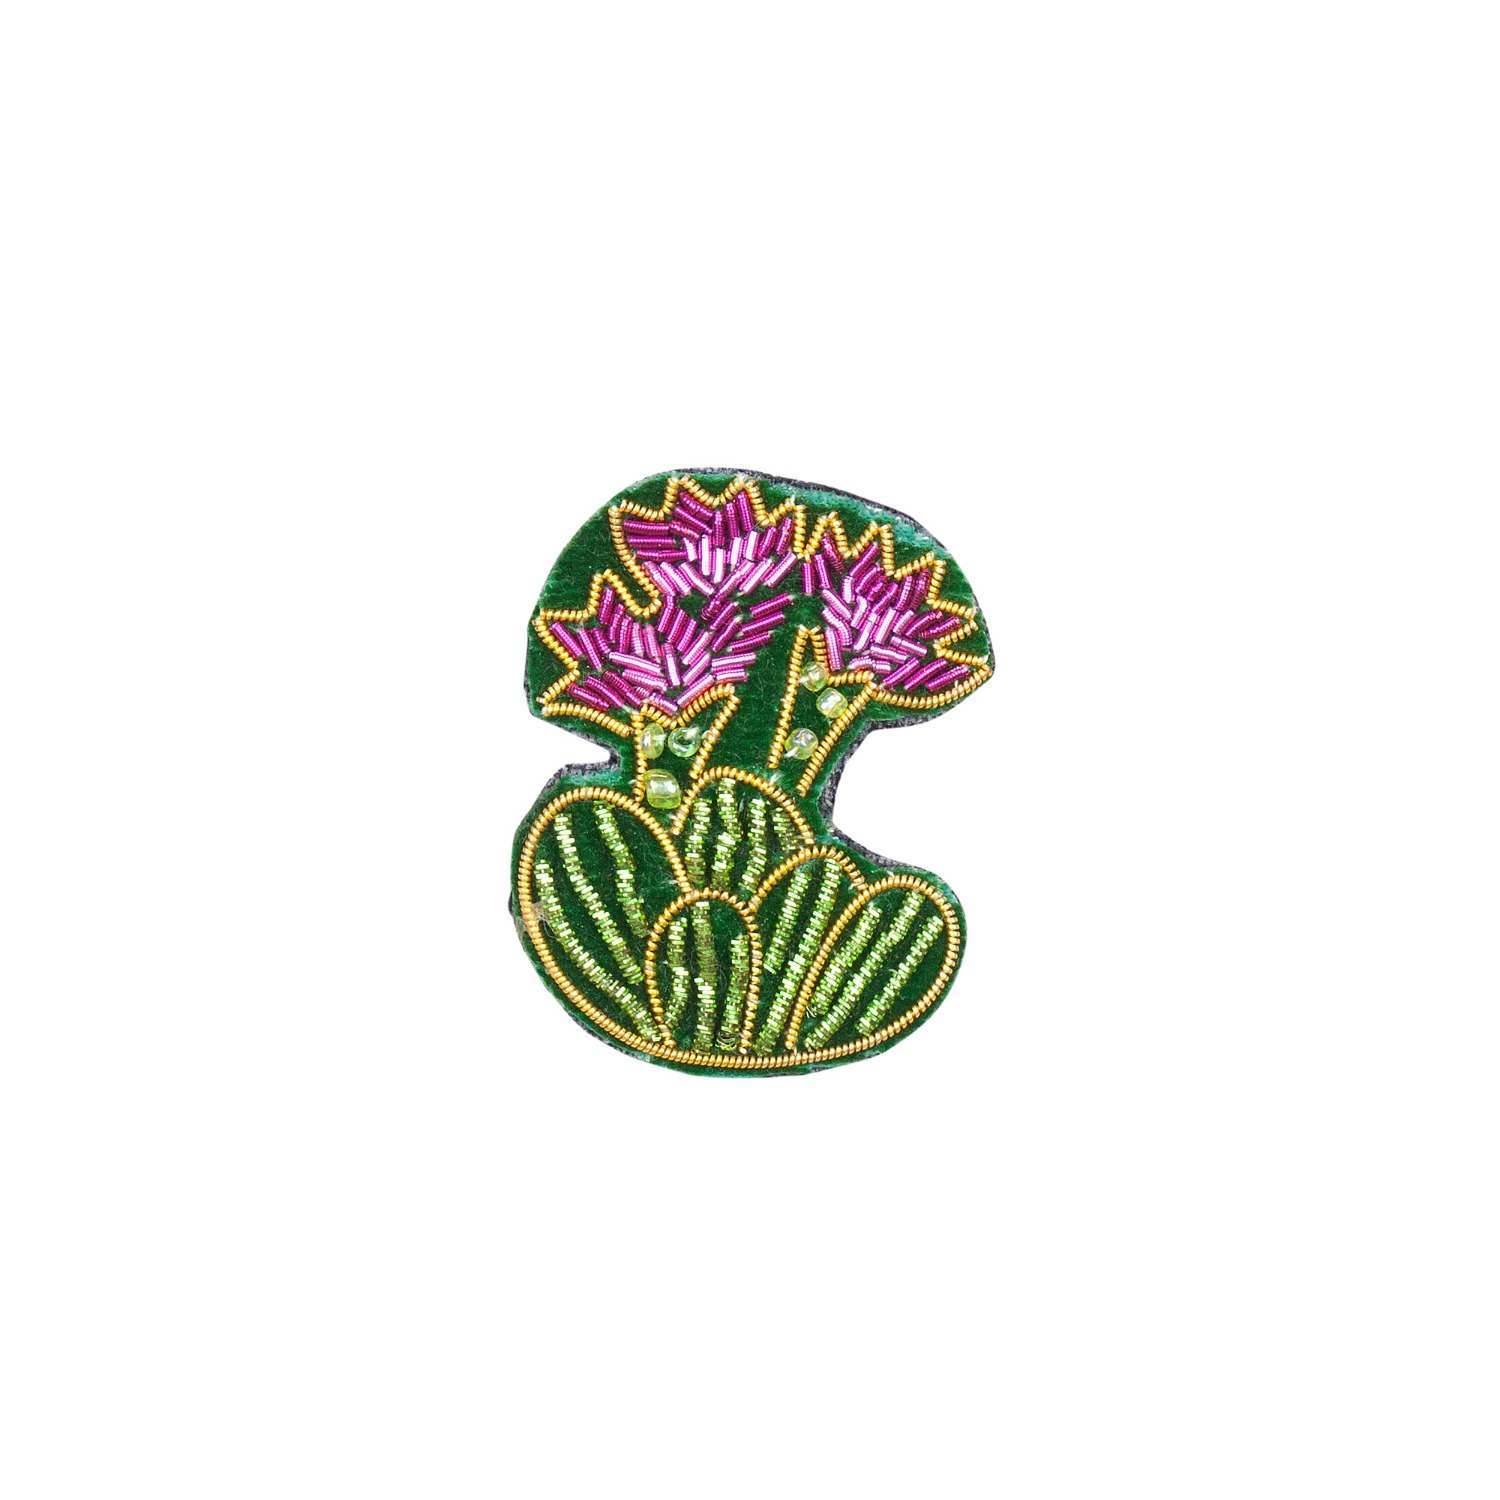 An image of Cactus Brooch